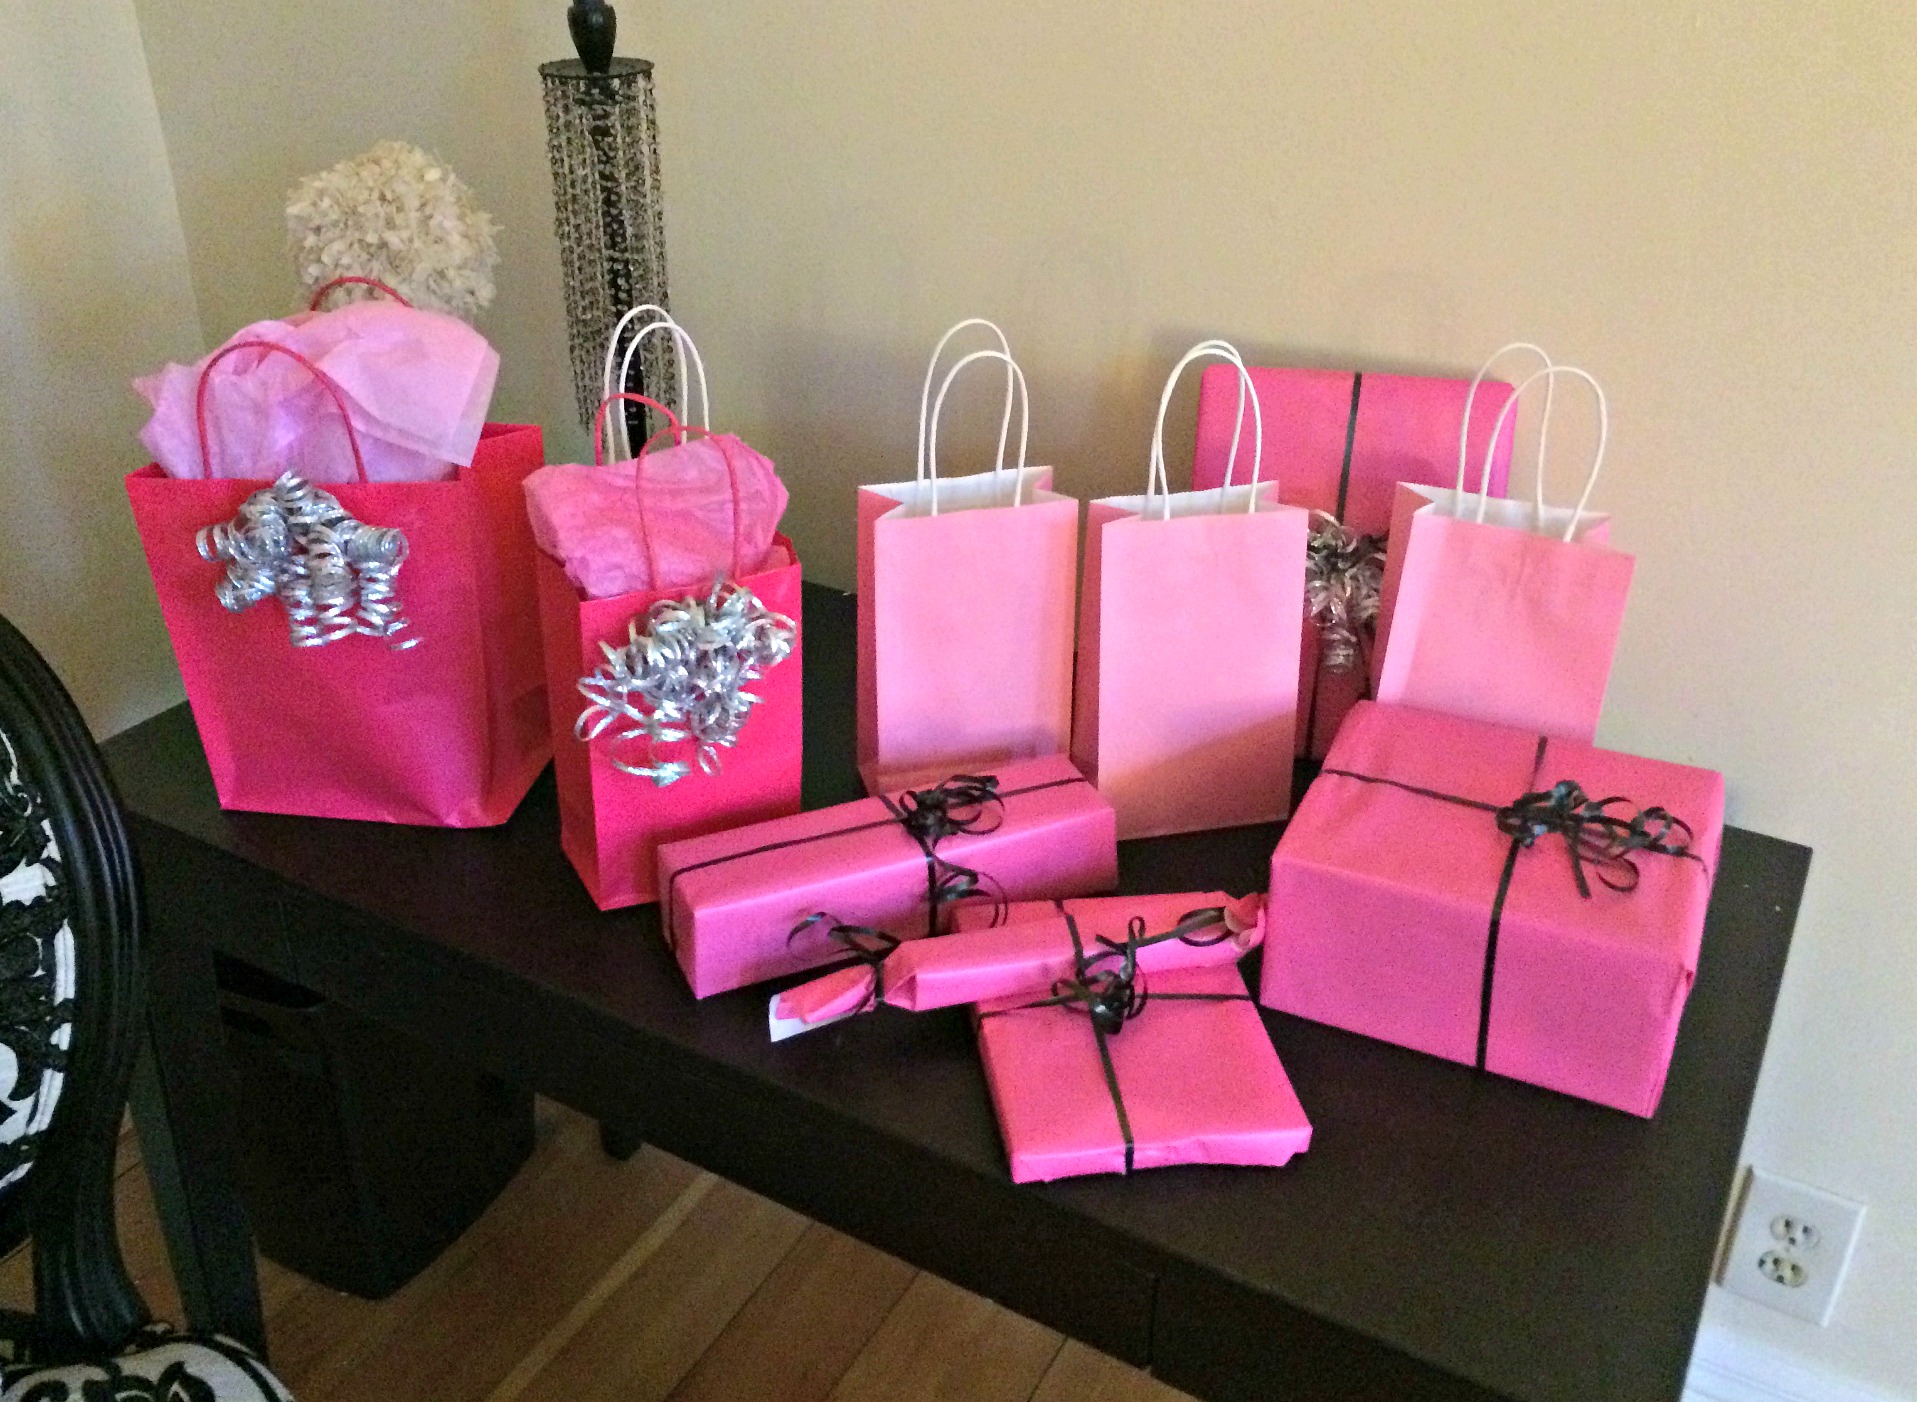 bachelorette party gifts